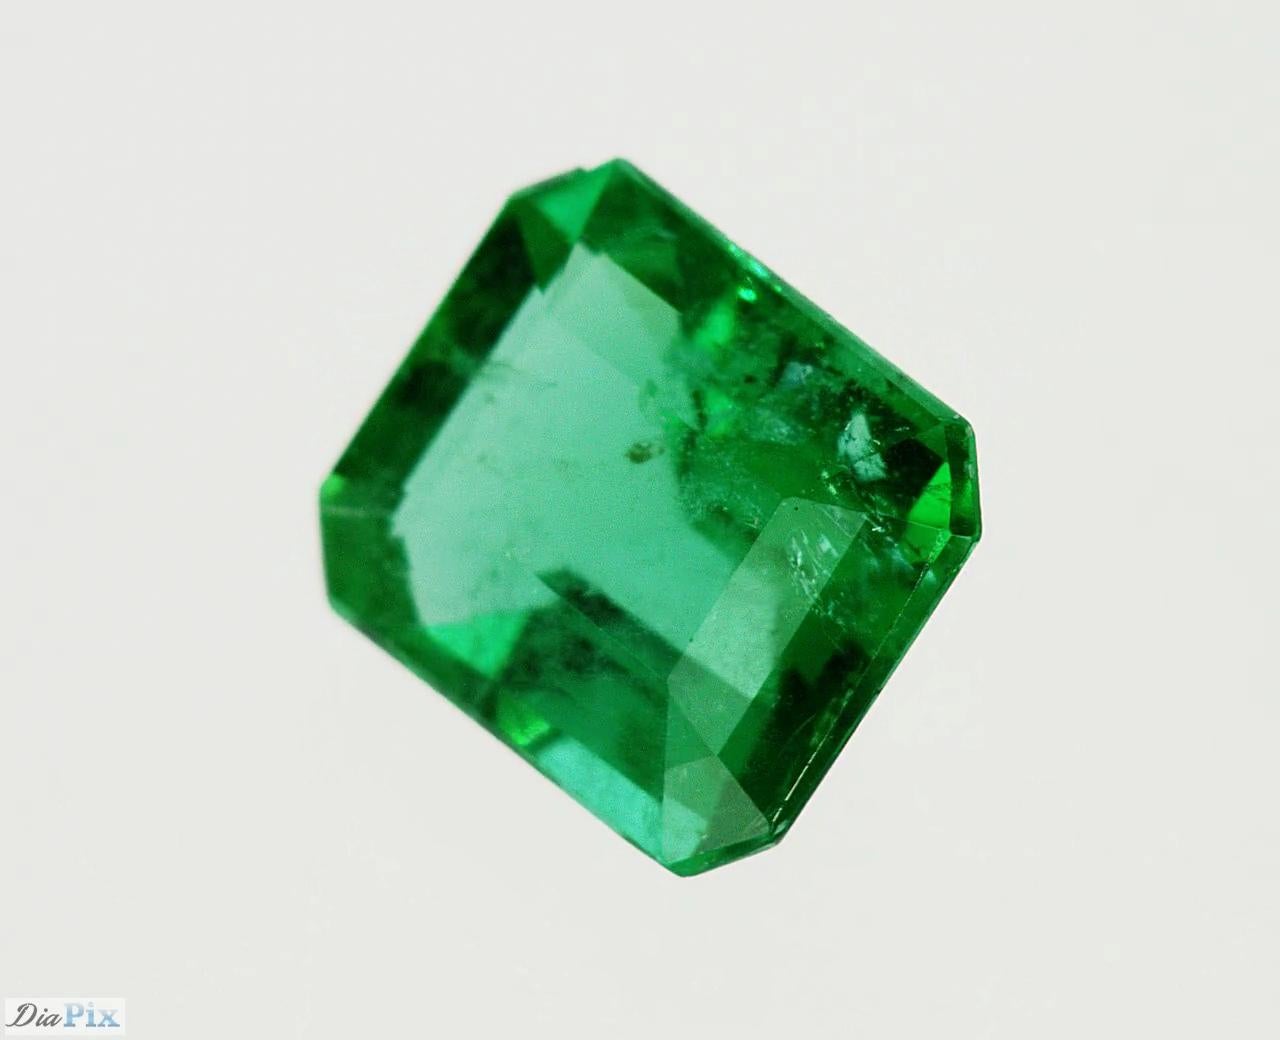 Octagon Cut Certified Vivid Green Emerald For Sale